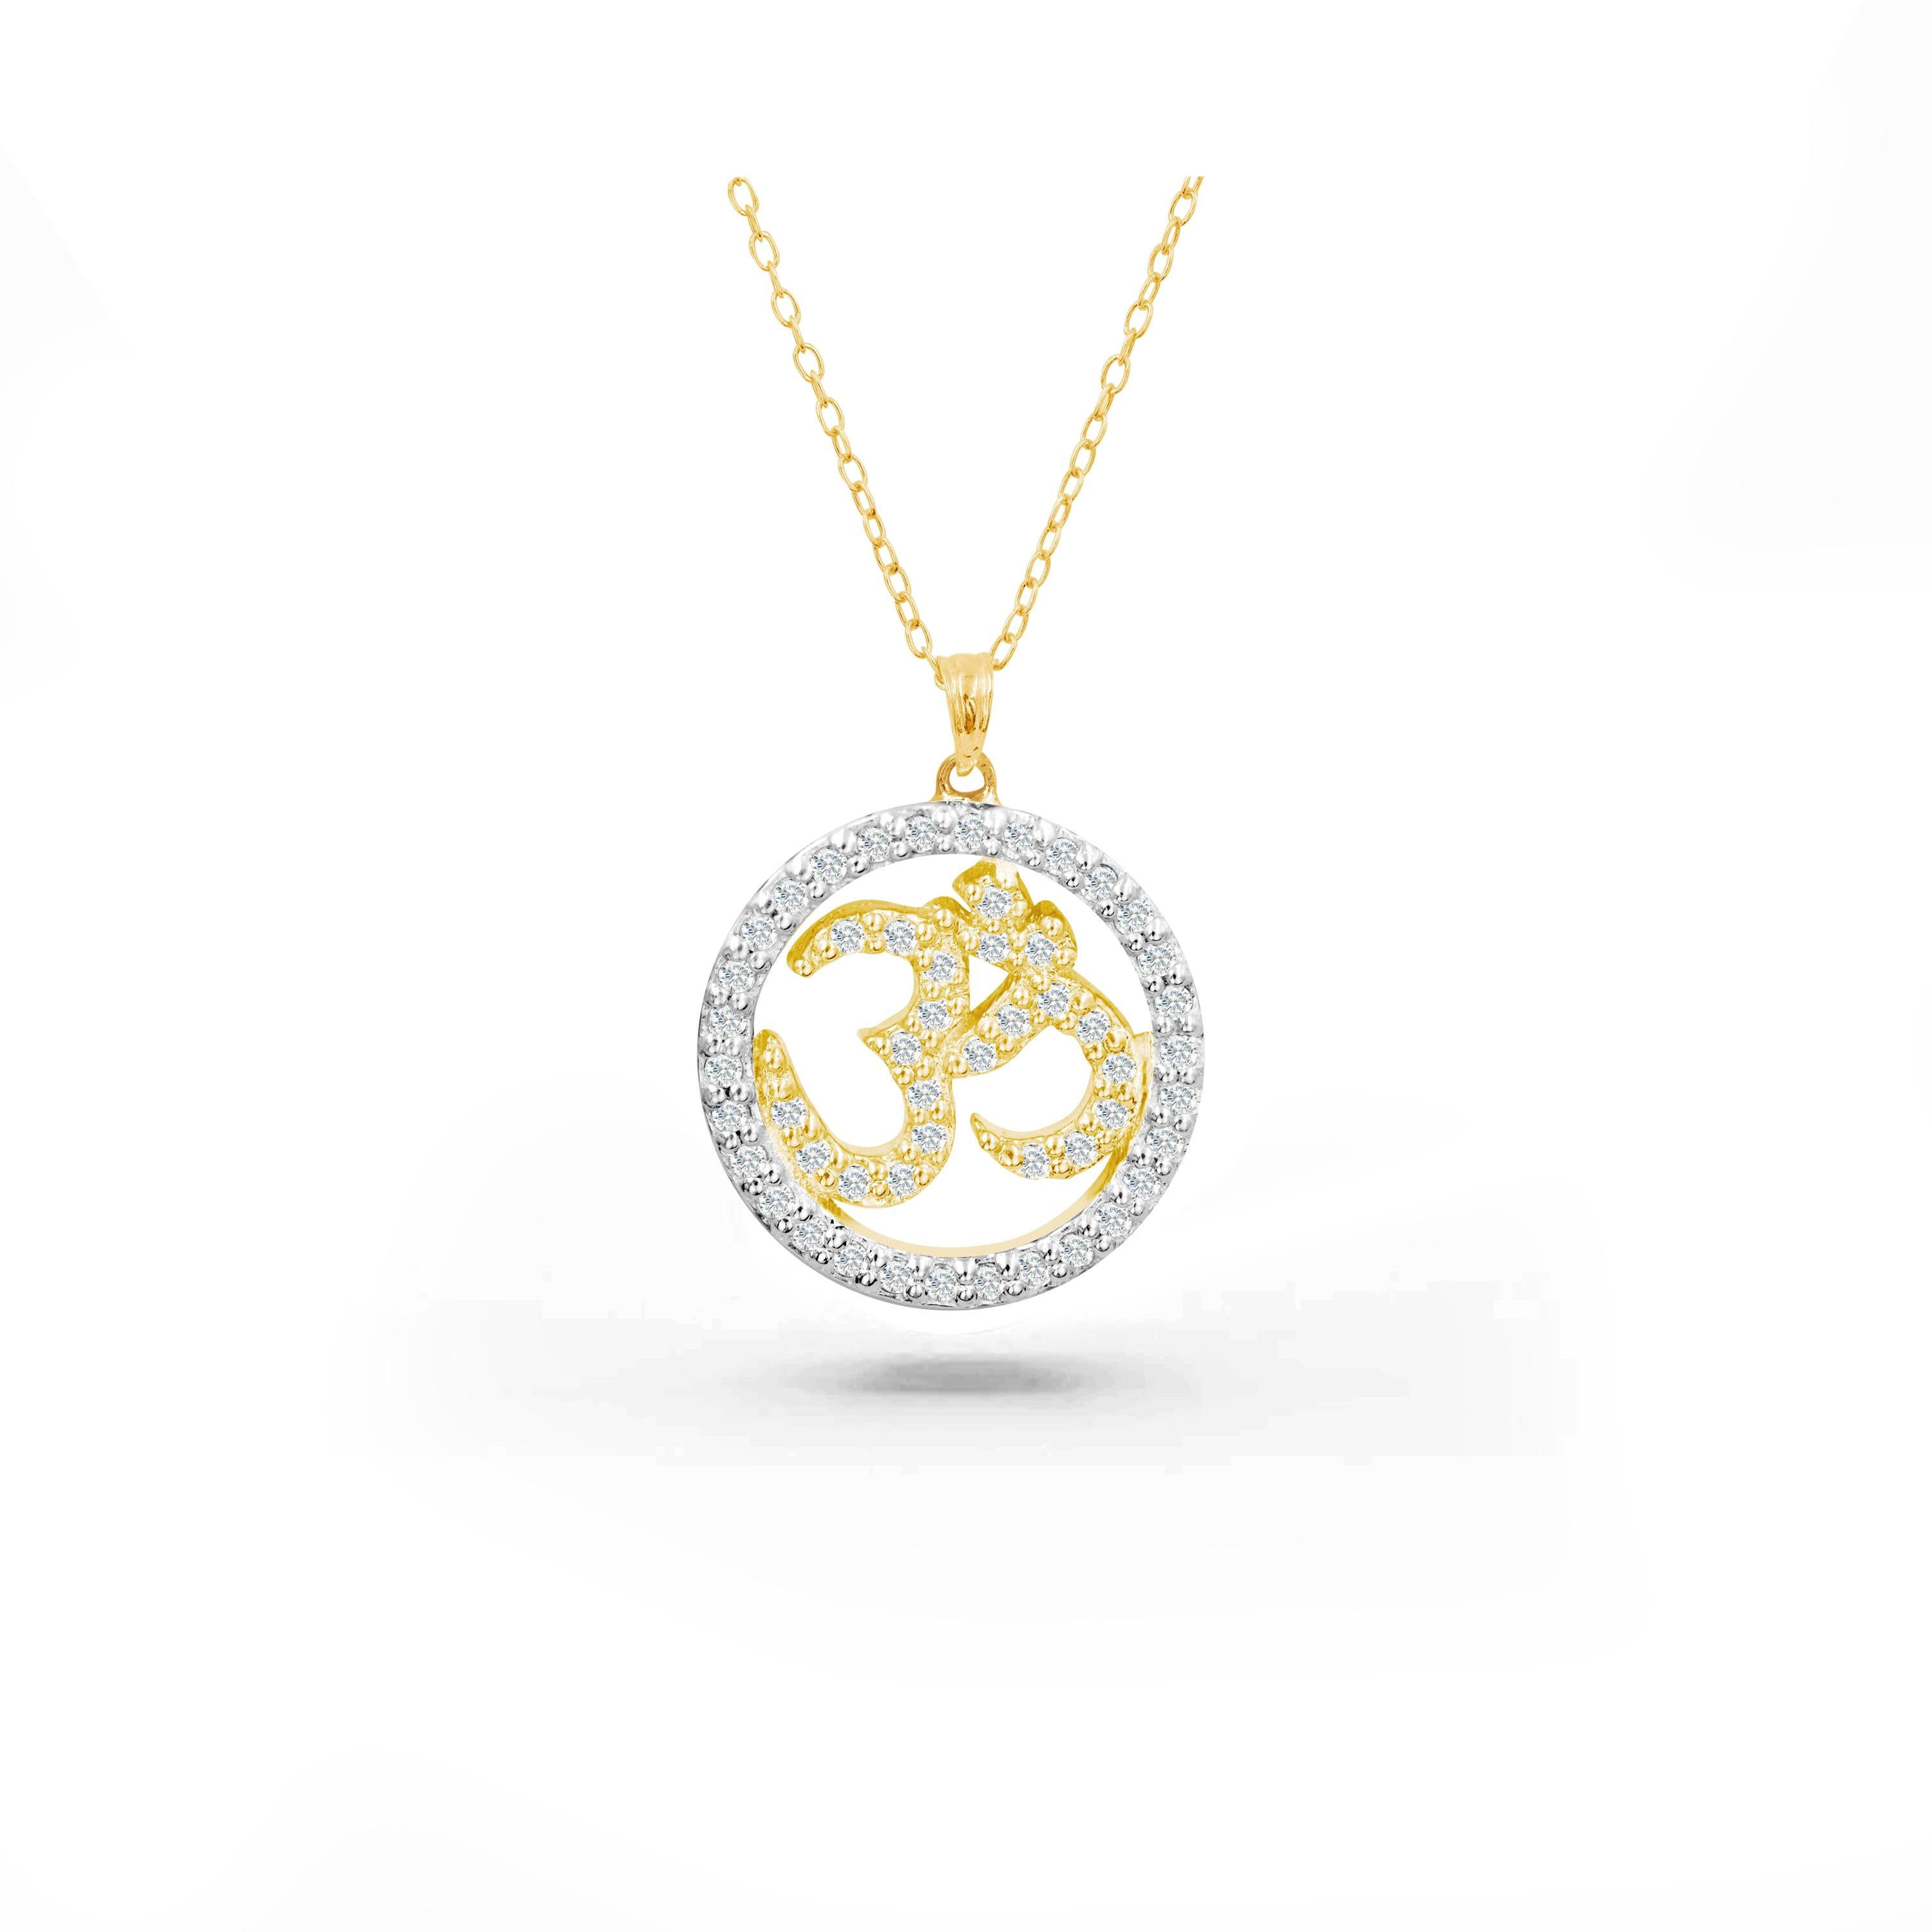 The Handcrafted OM Halo diamond necklace is perfect everyday wear to bring inner peace and spirituality. We guarantee top-notch quality with 0.34 carat diamonds beautifully set in this necklace.  This Hindu necklace can be customized to your choice